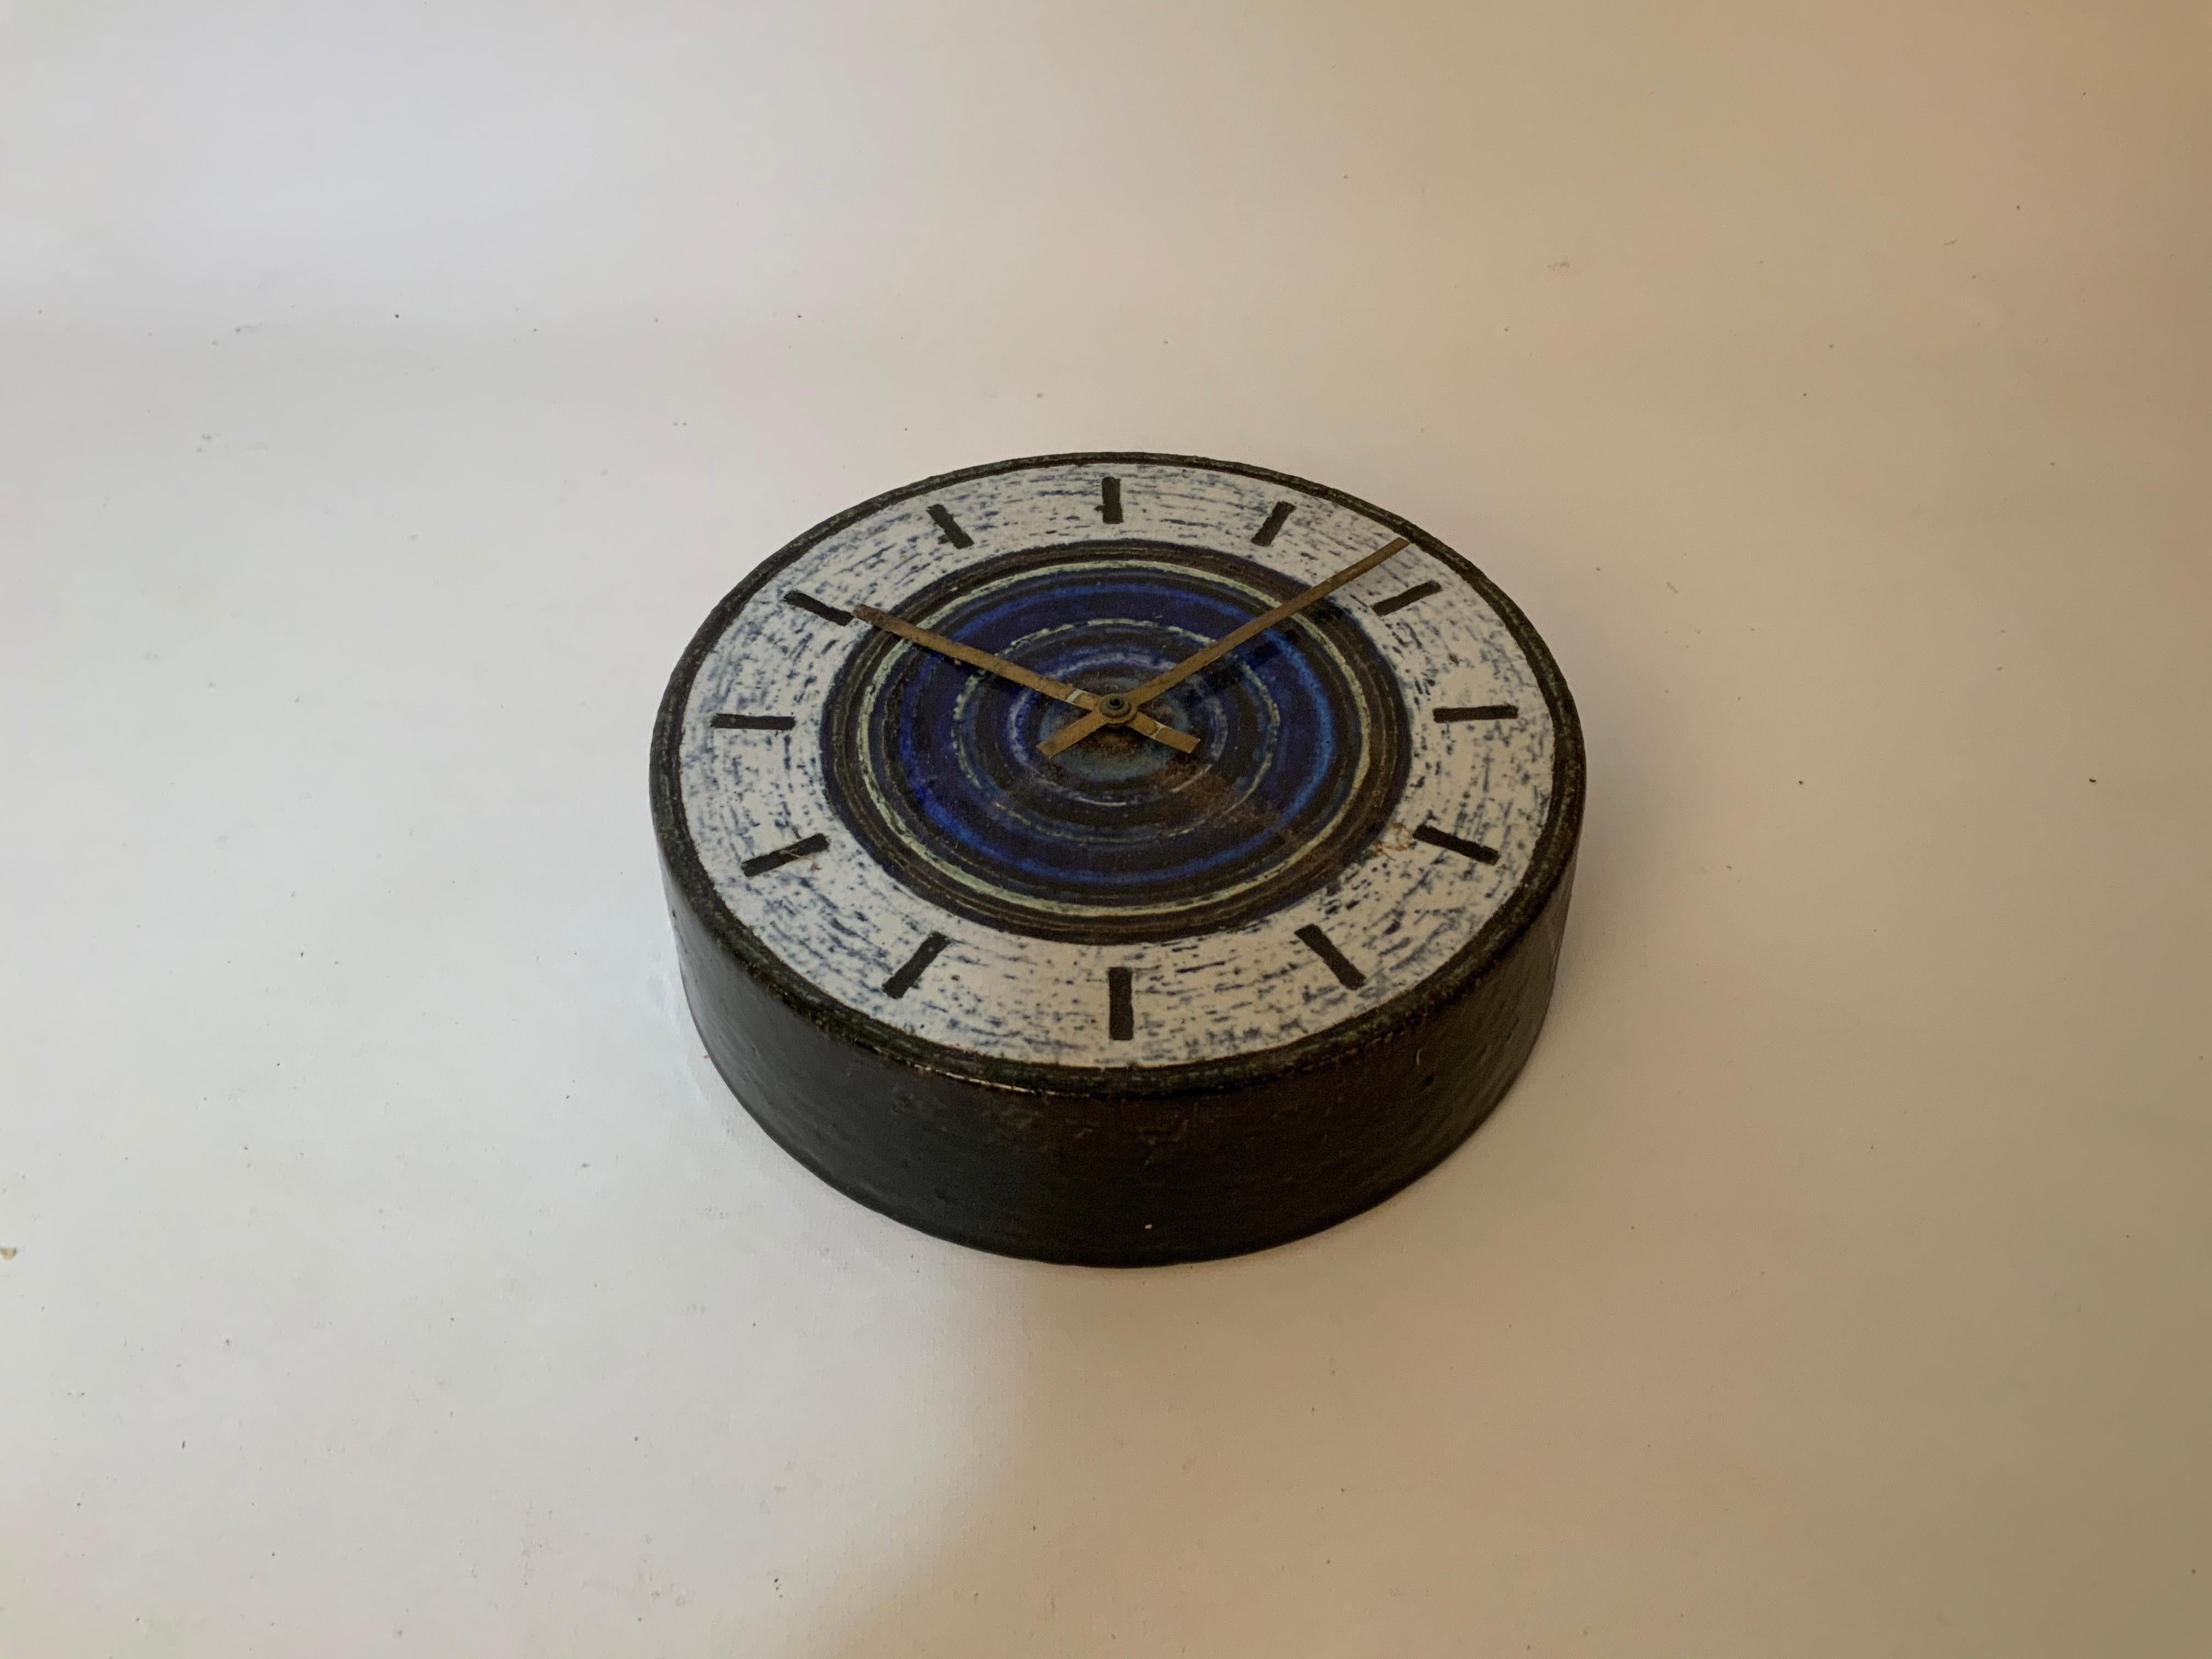 Beautiful stoneware pottery clock by Britt-Louise Sundell for Gustavsberg. Circa 1950-60. Signed on the back, BS G (with radiating flames). White, blue and black high gloss glazes. Very good condition. Metal hands have some brass finish loss. No